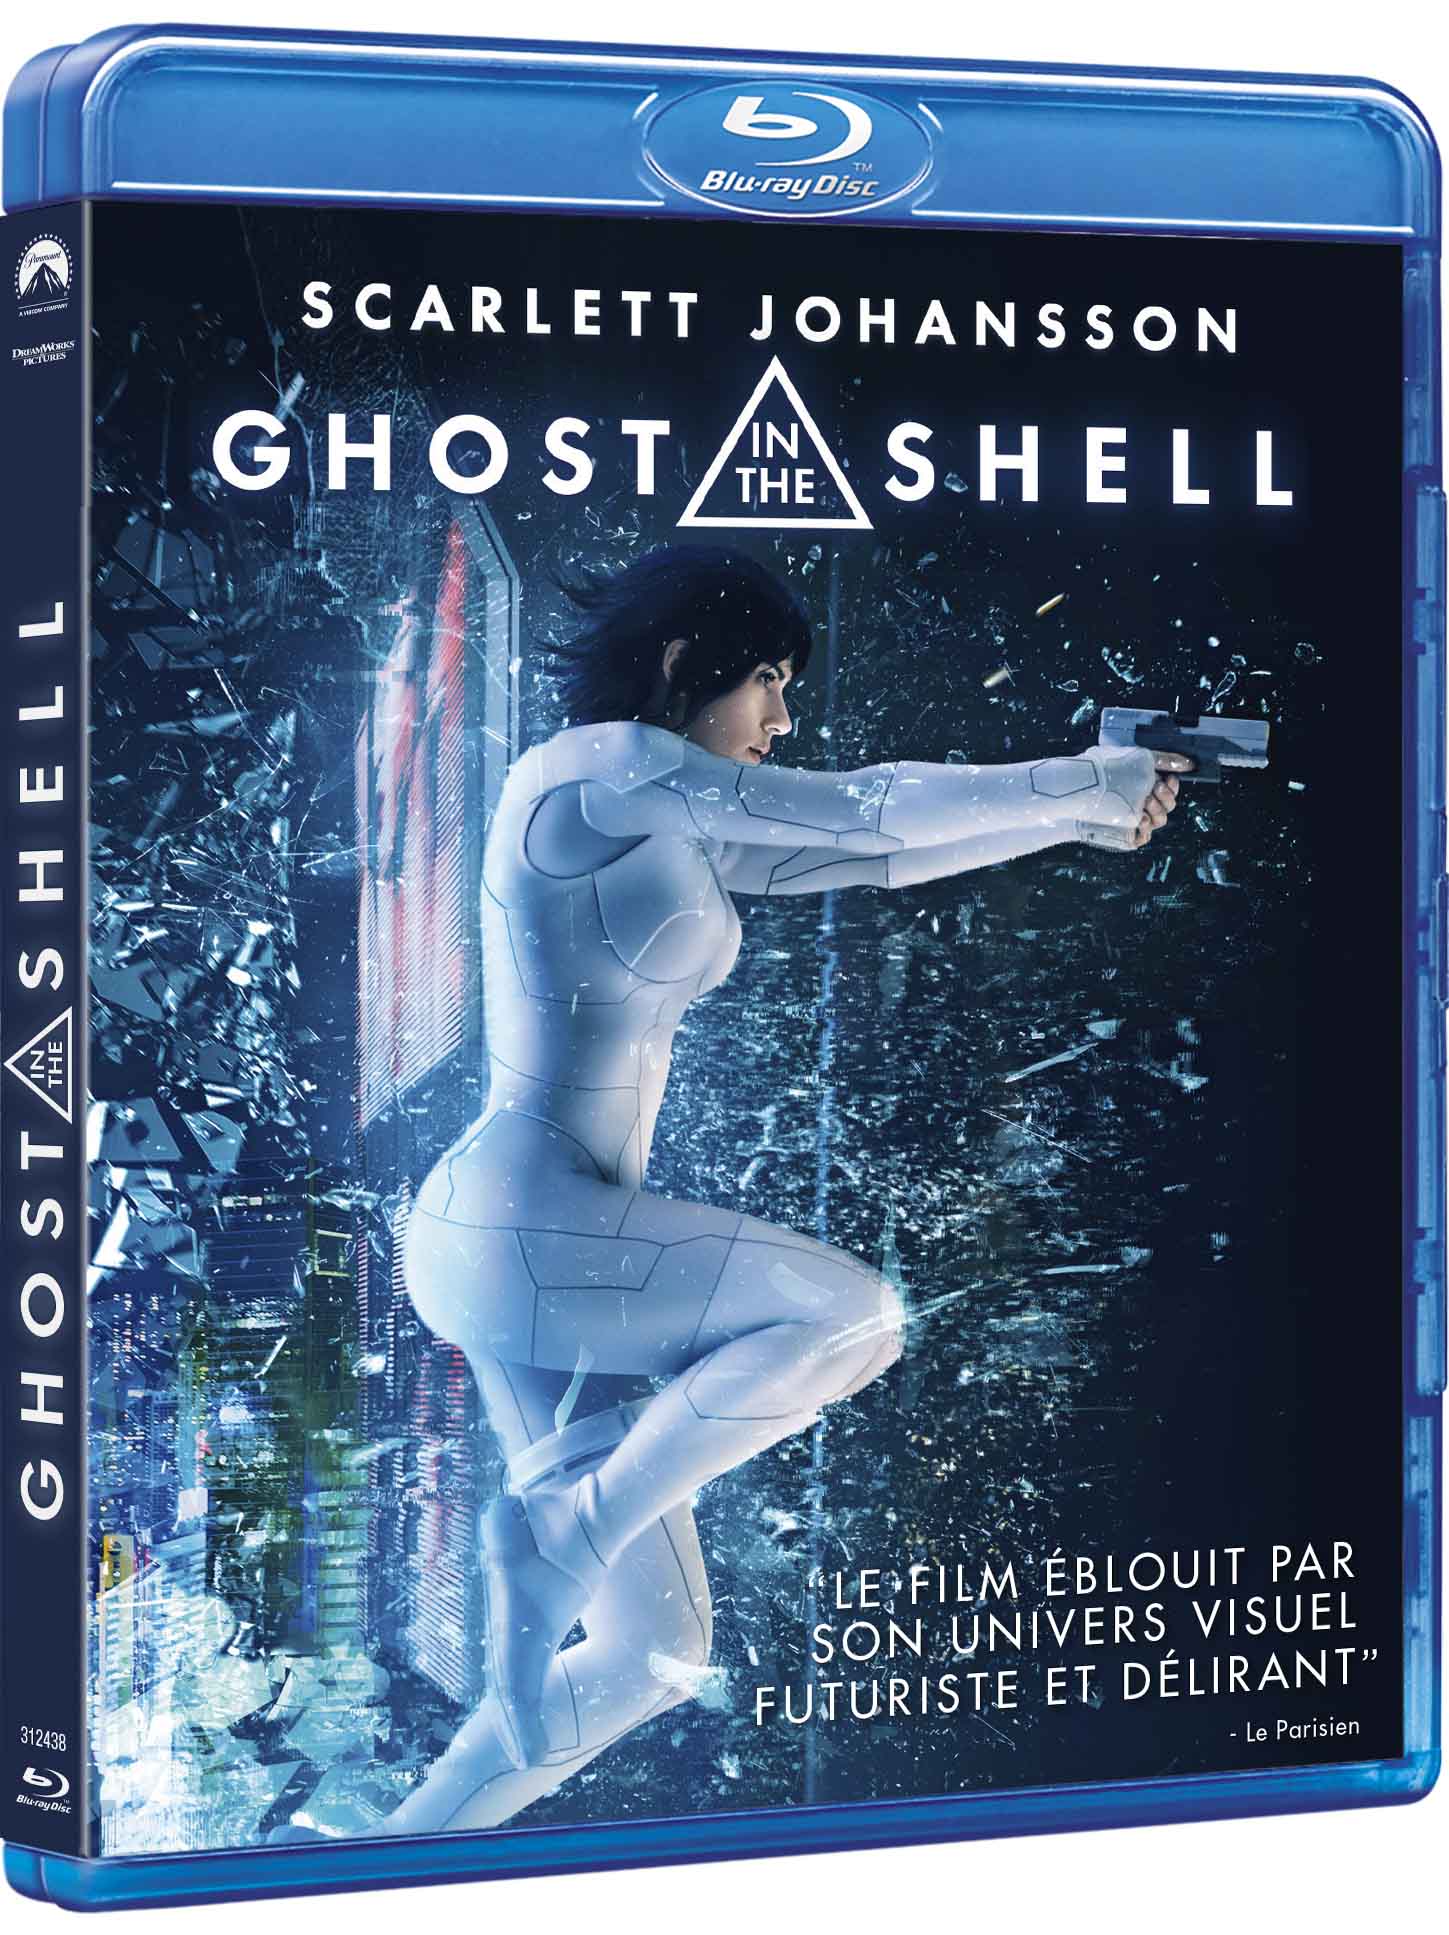 Blu-Ray Ghost in the shell